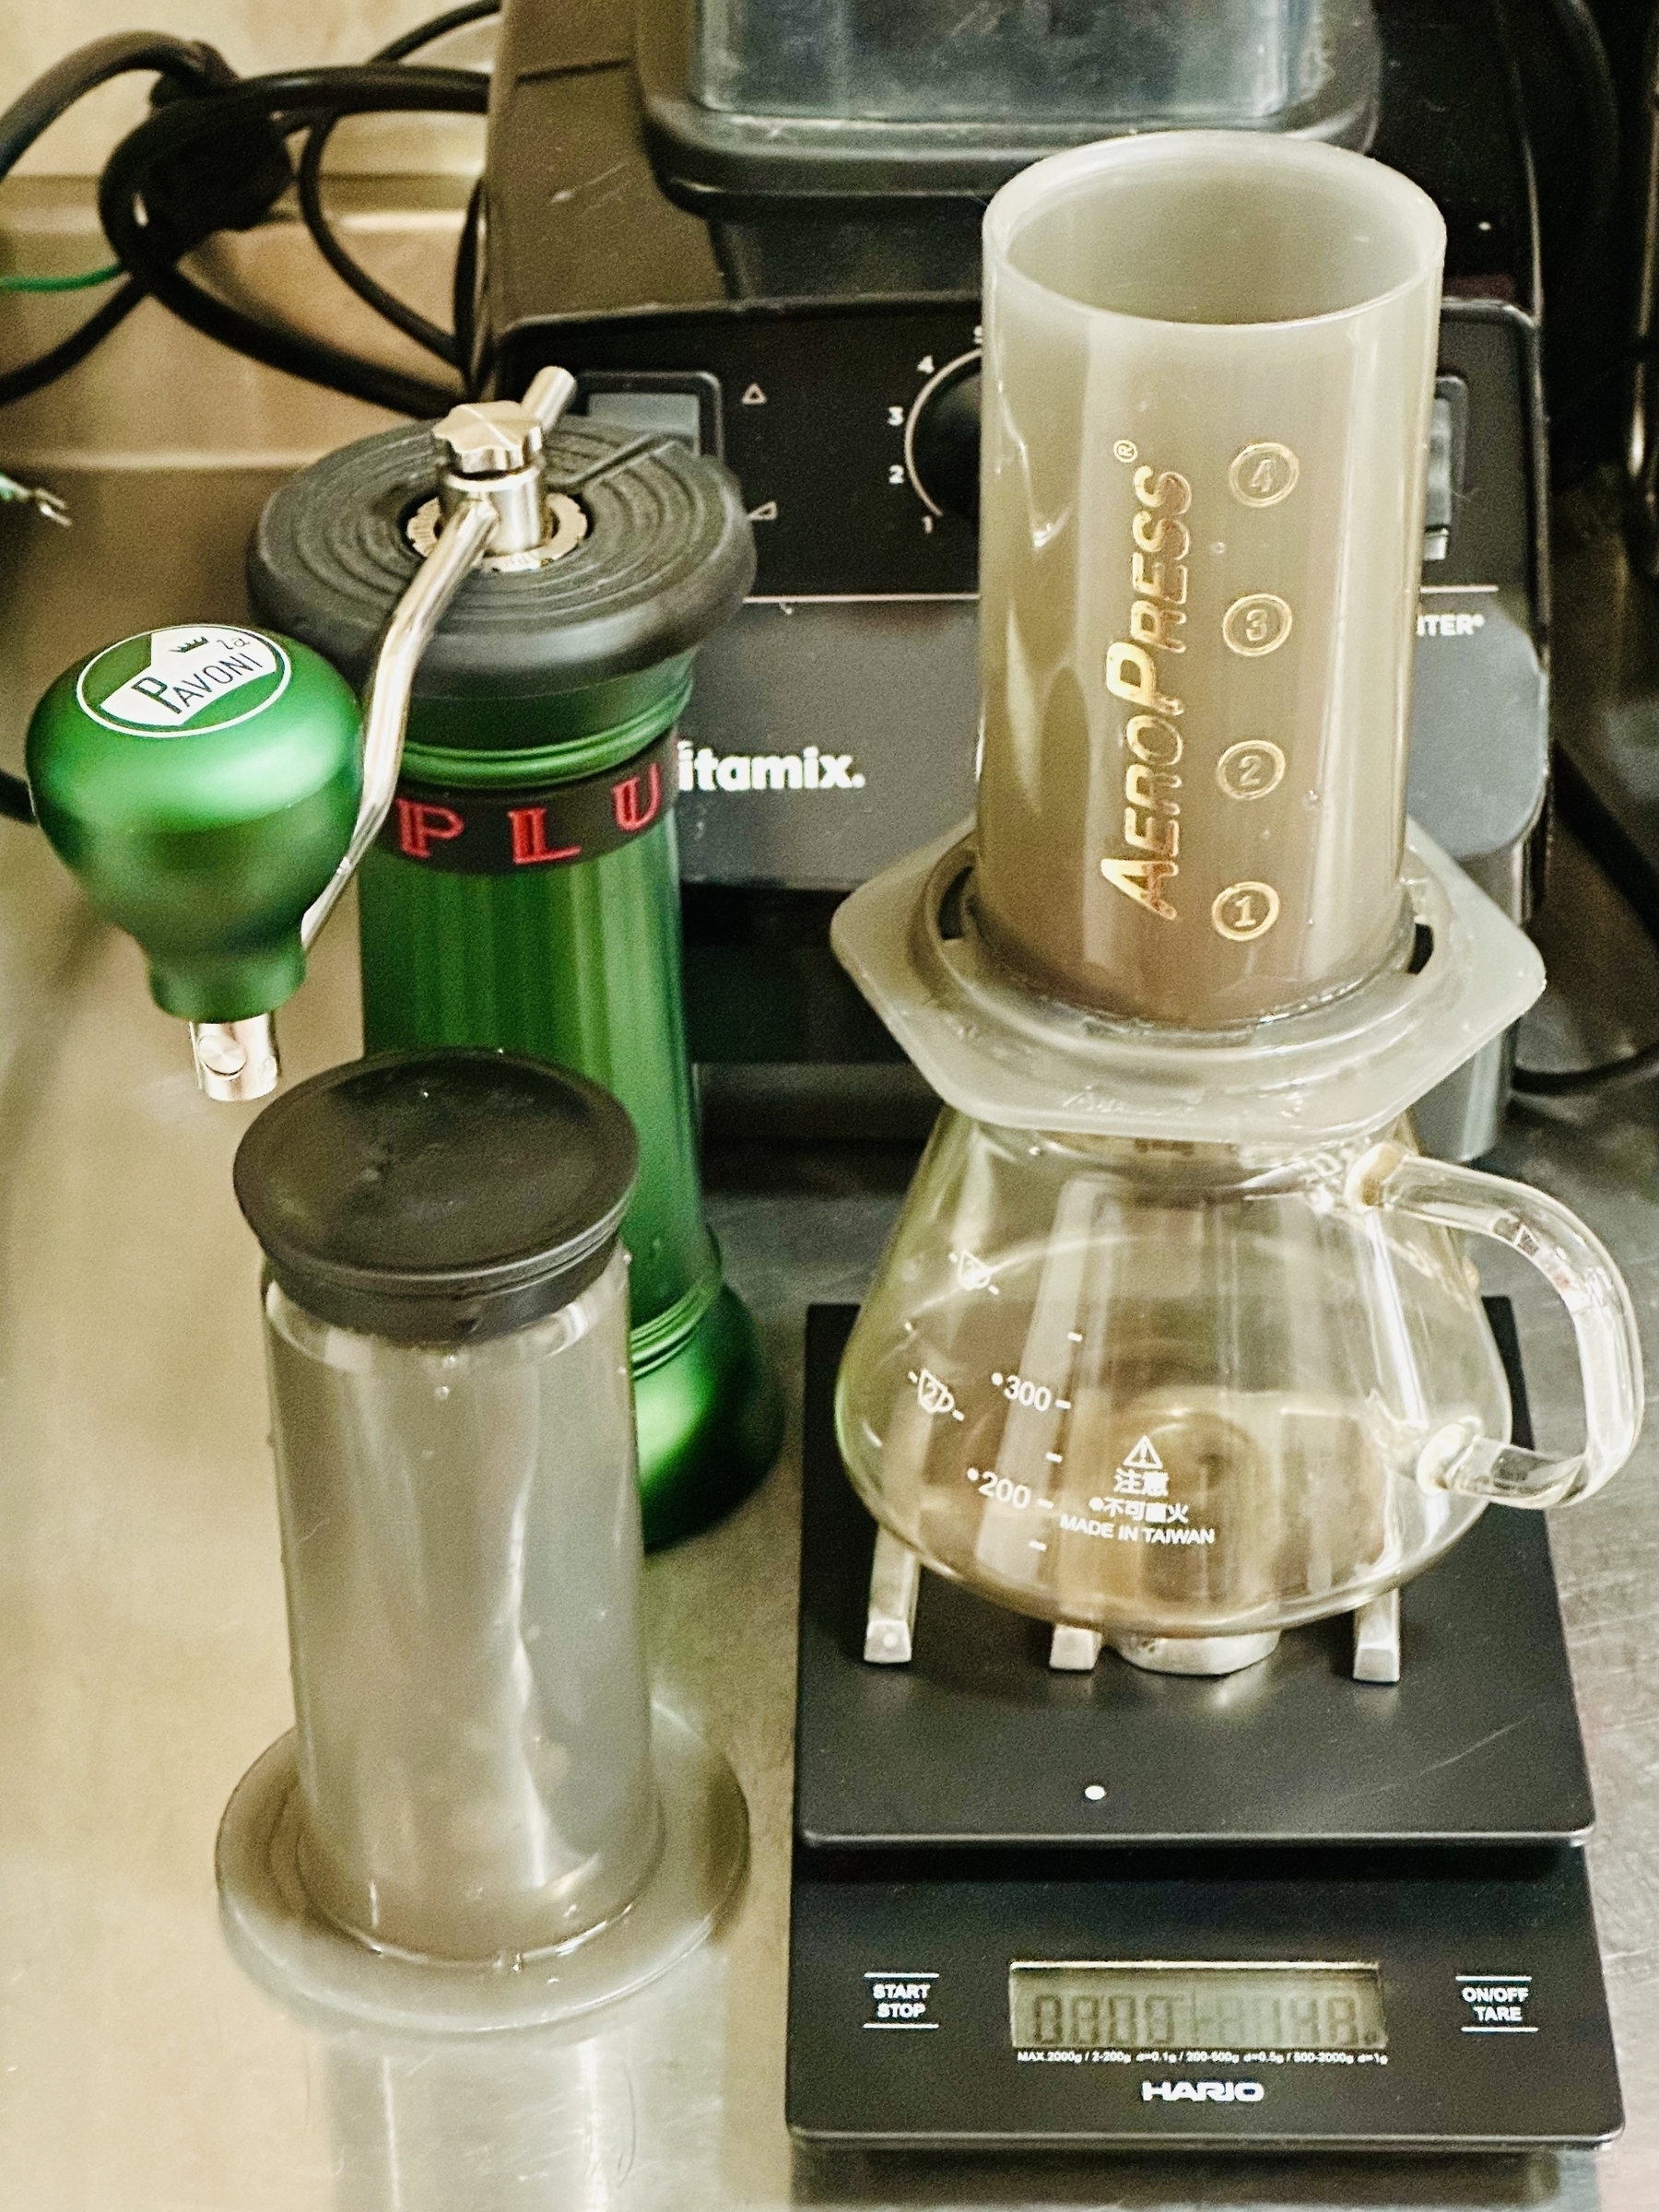 AeroPress set up on digital scale with manual grinder beside it